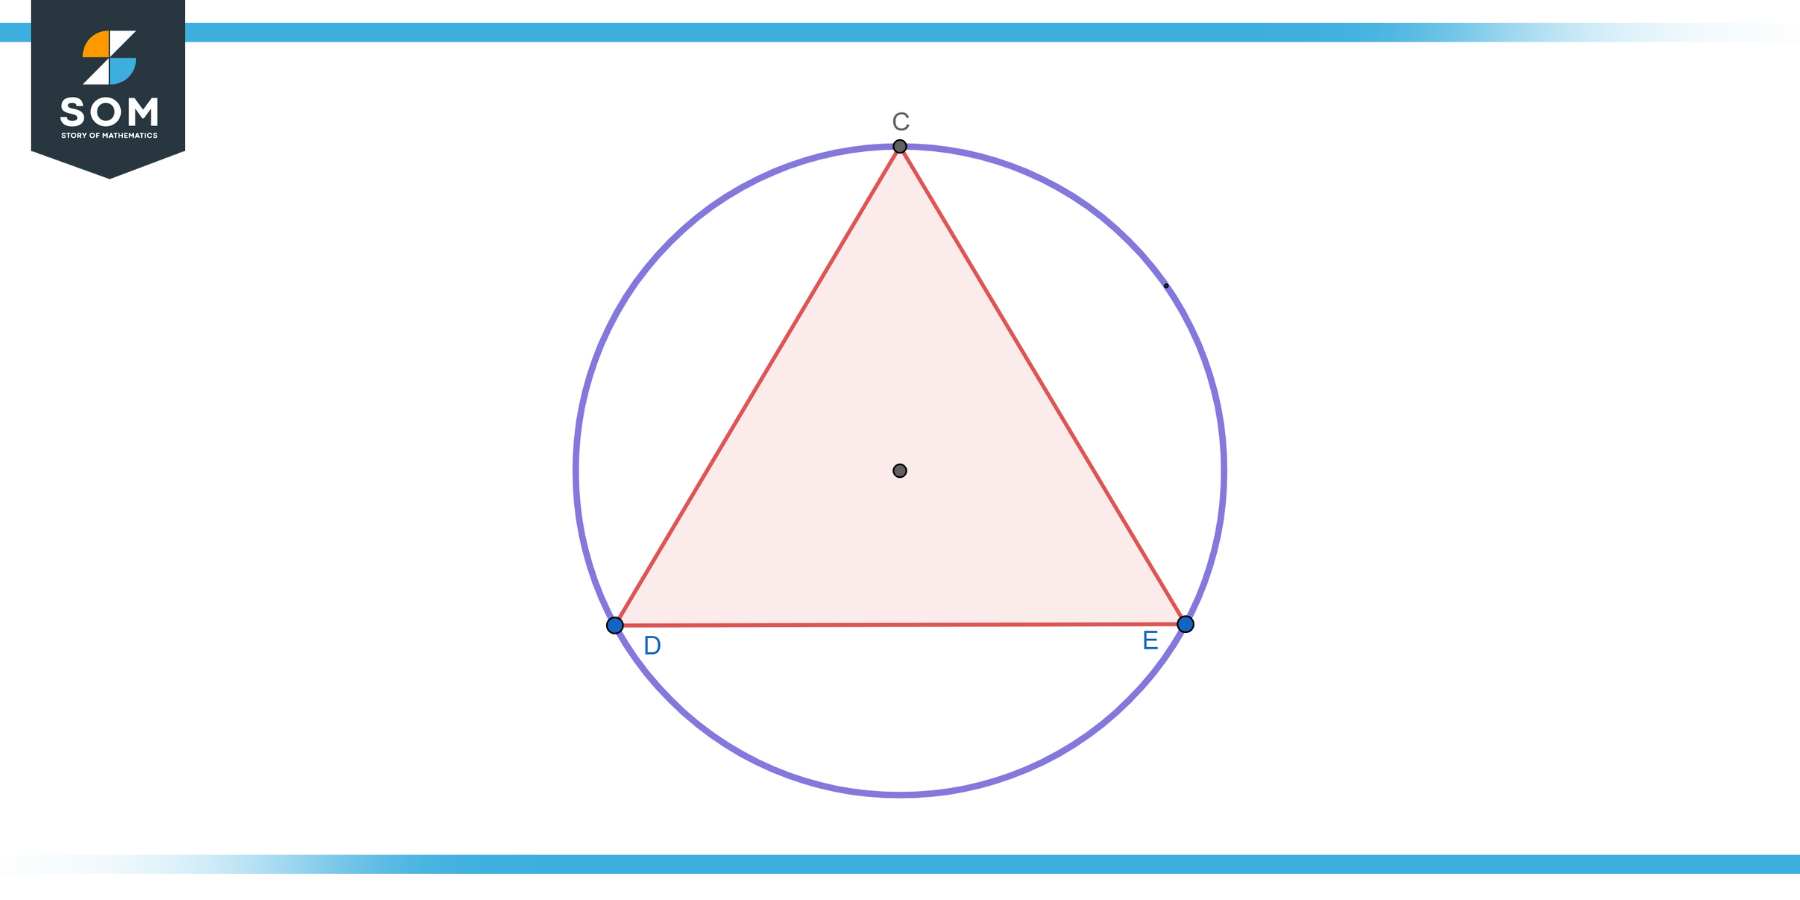 Generic representation of a triangle CDE inside a circle